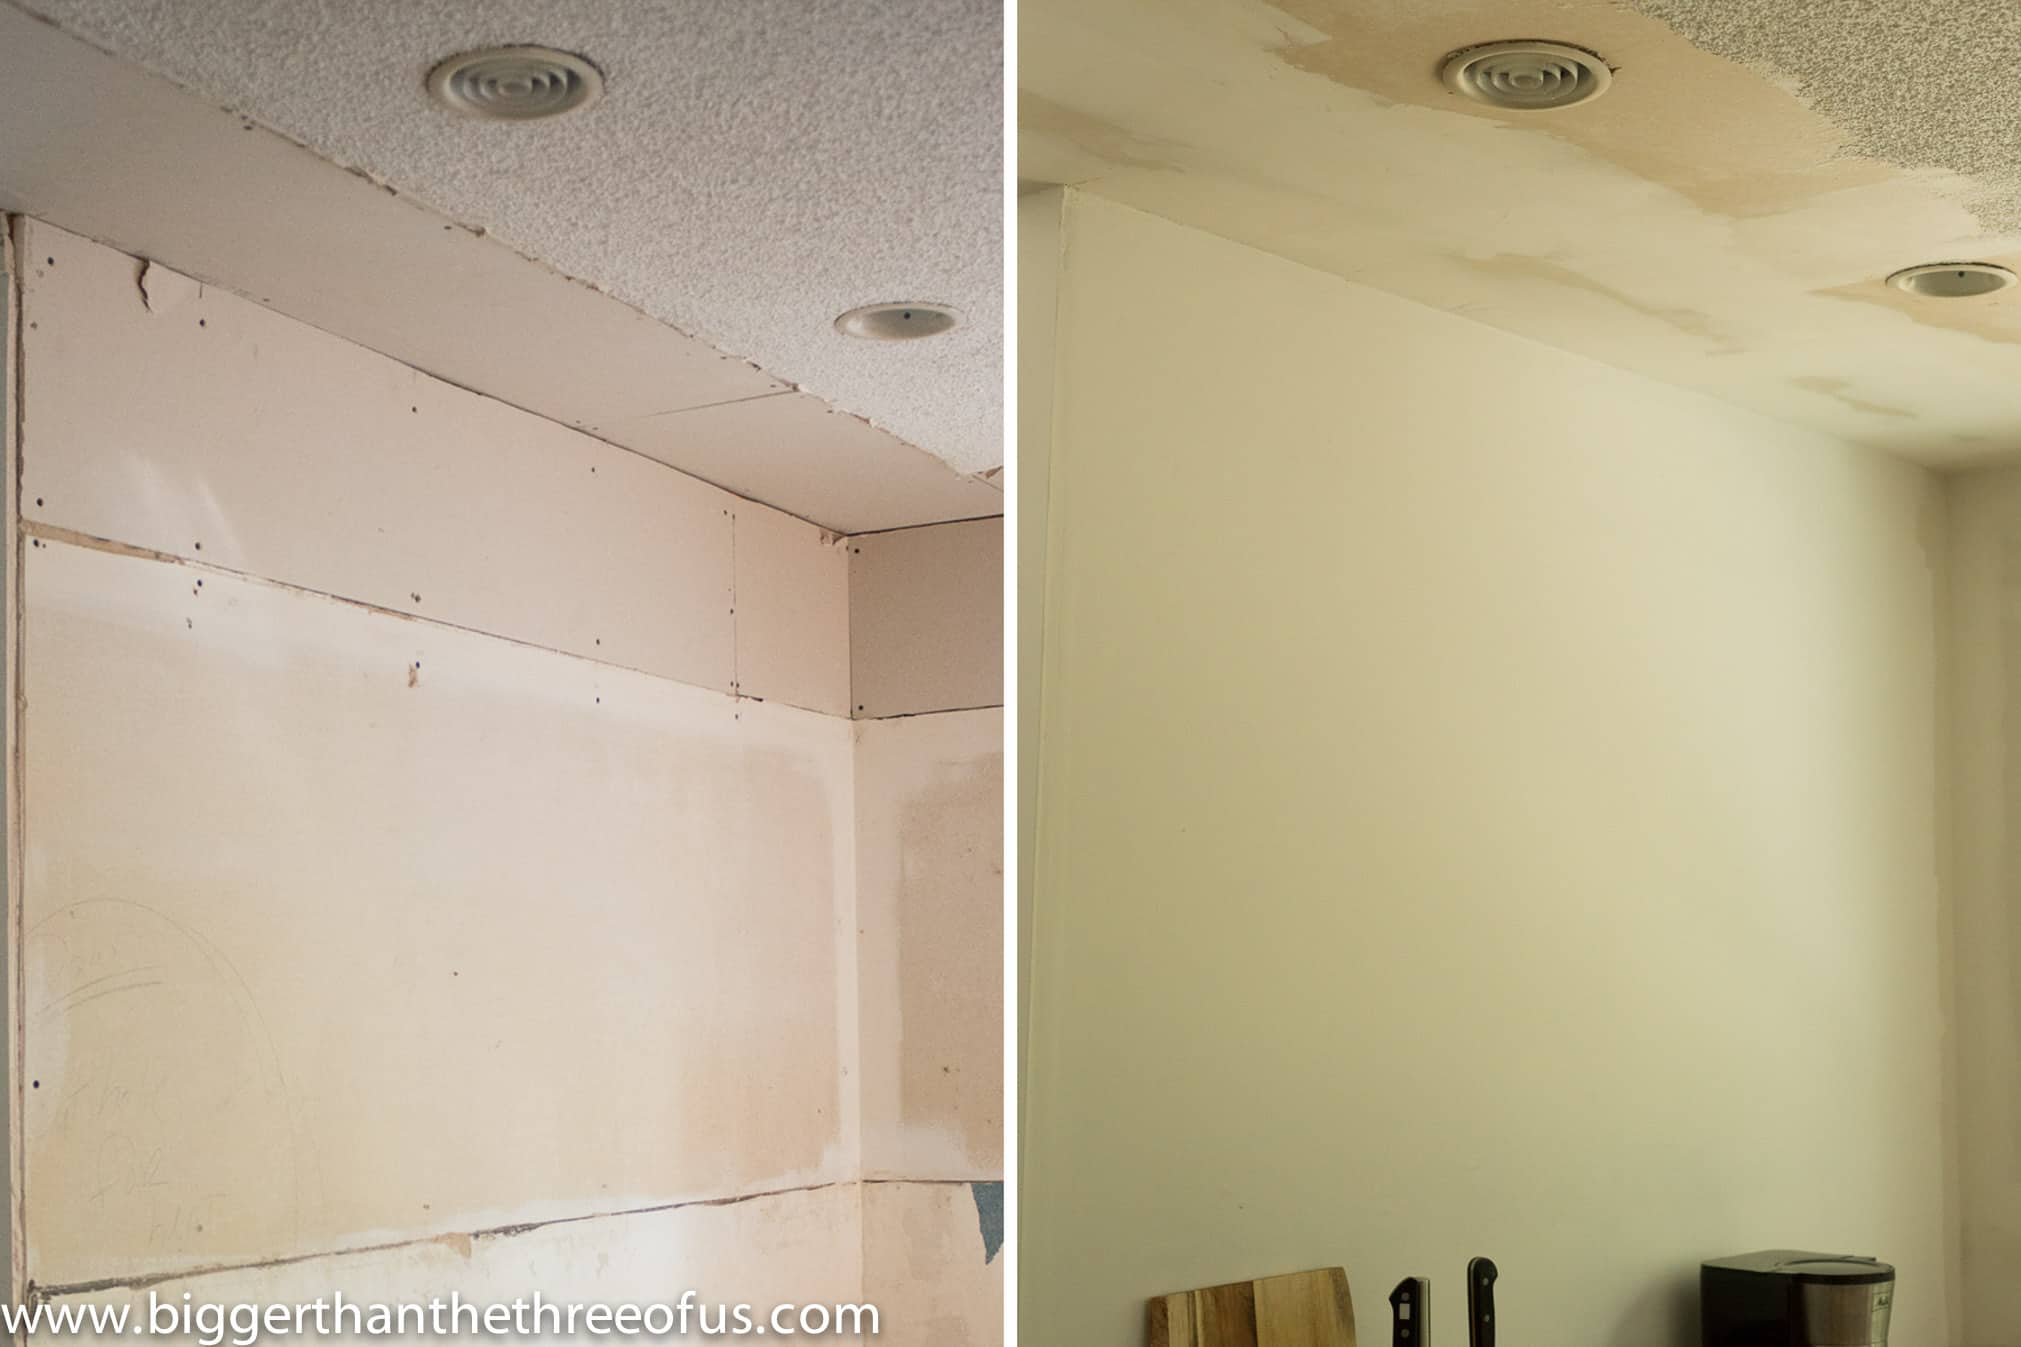 How to Mud Drywall - it's easier than you think! Full tutorial provided.